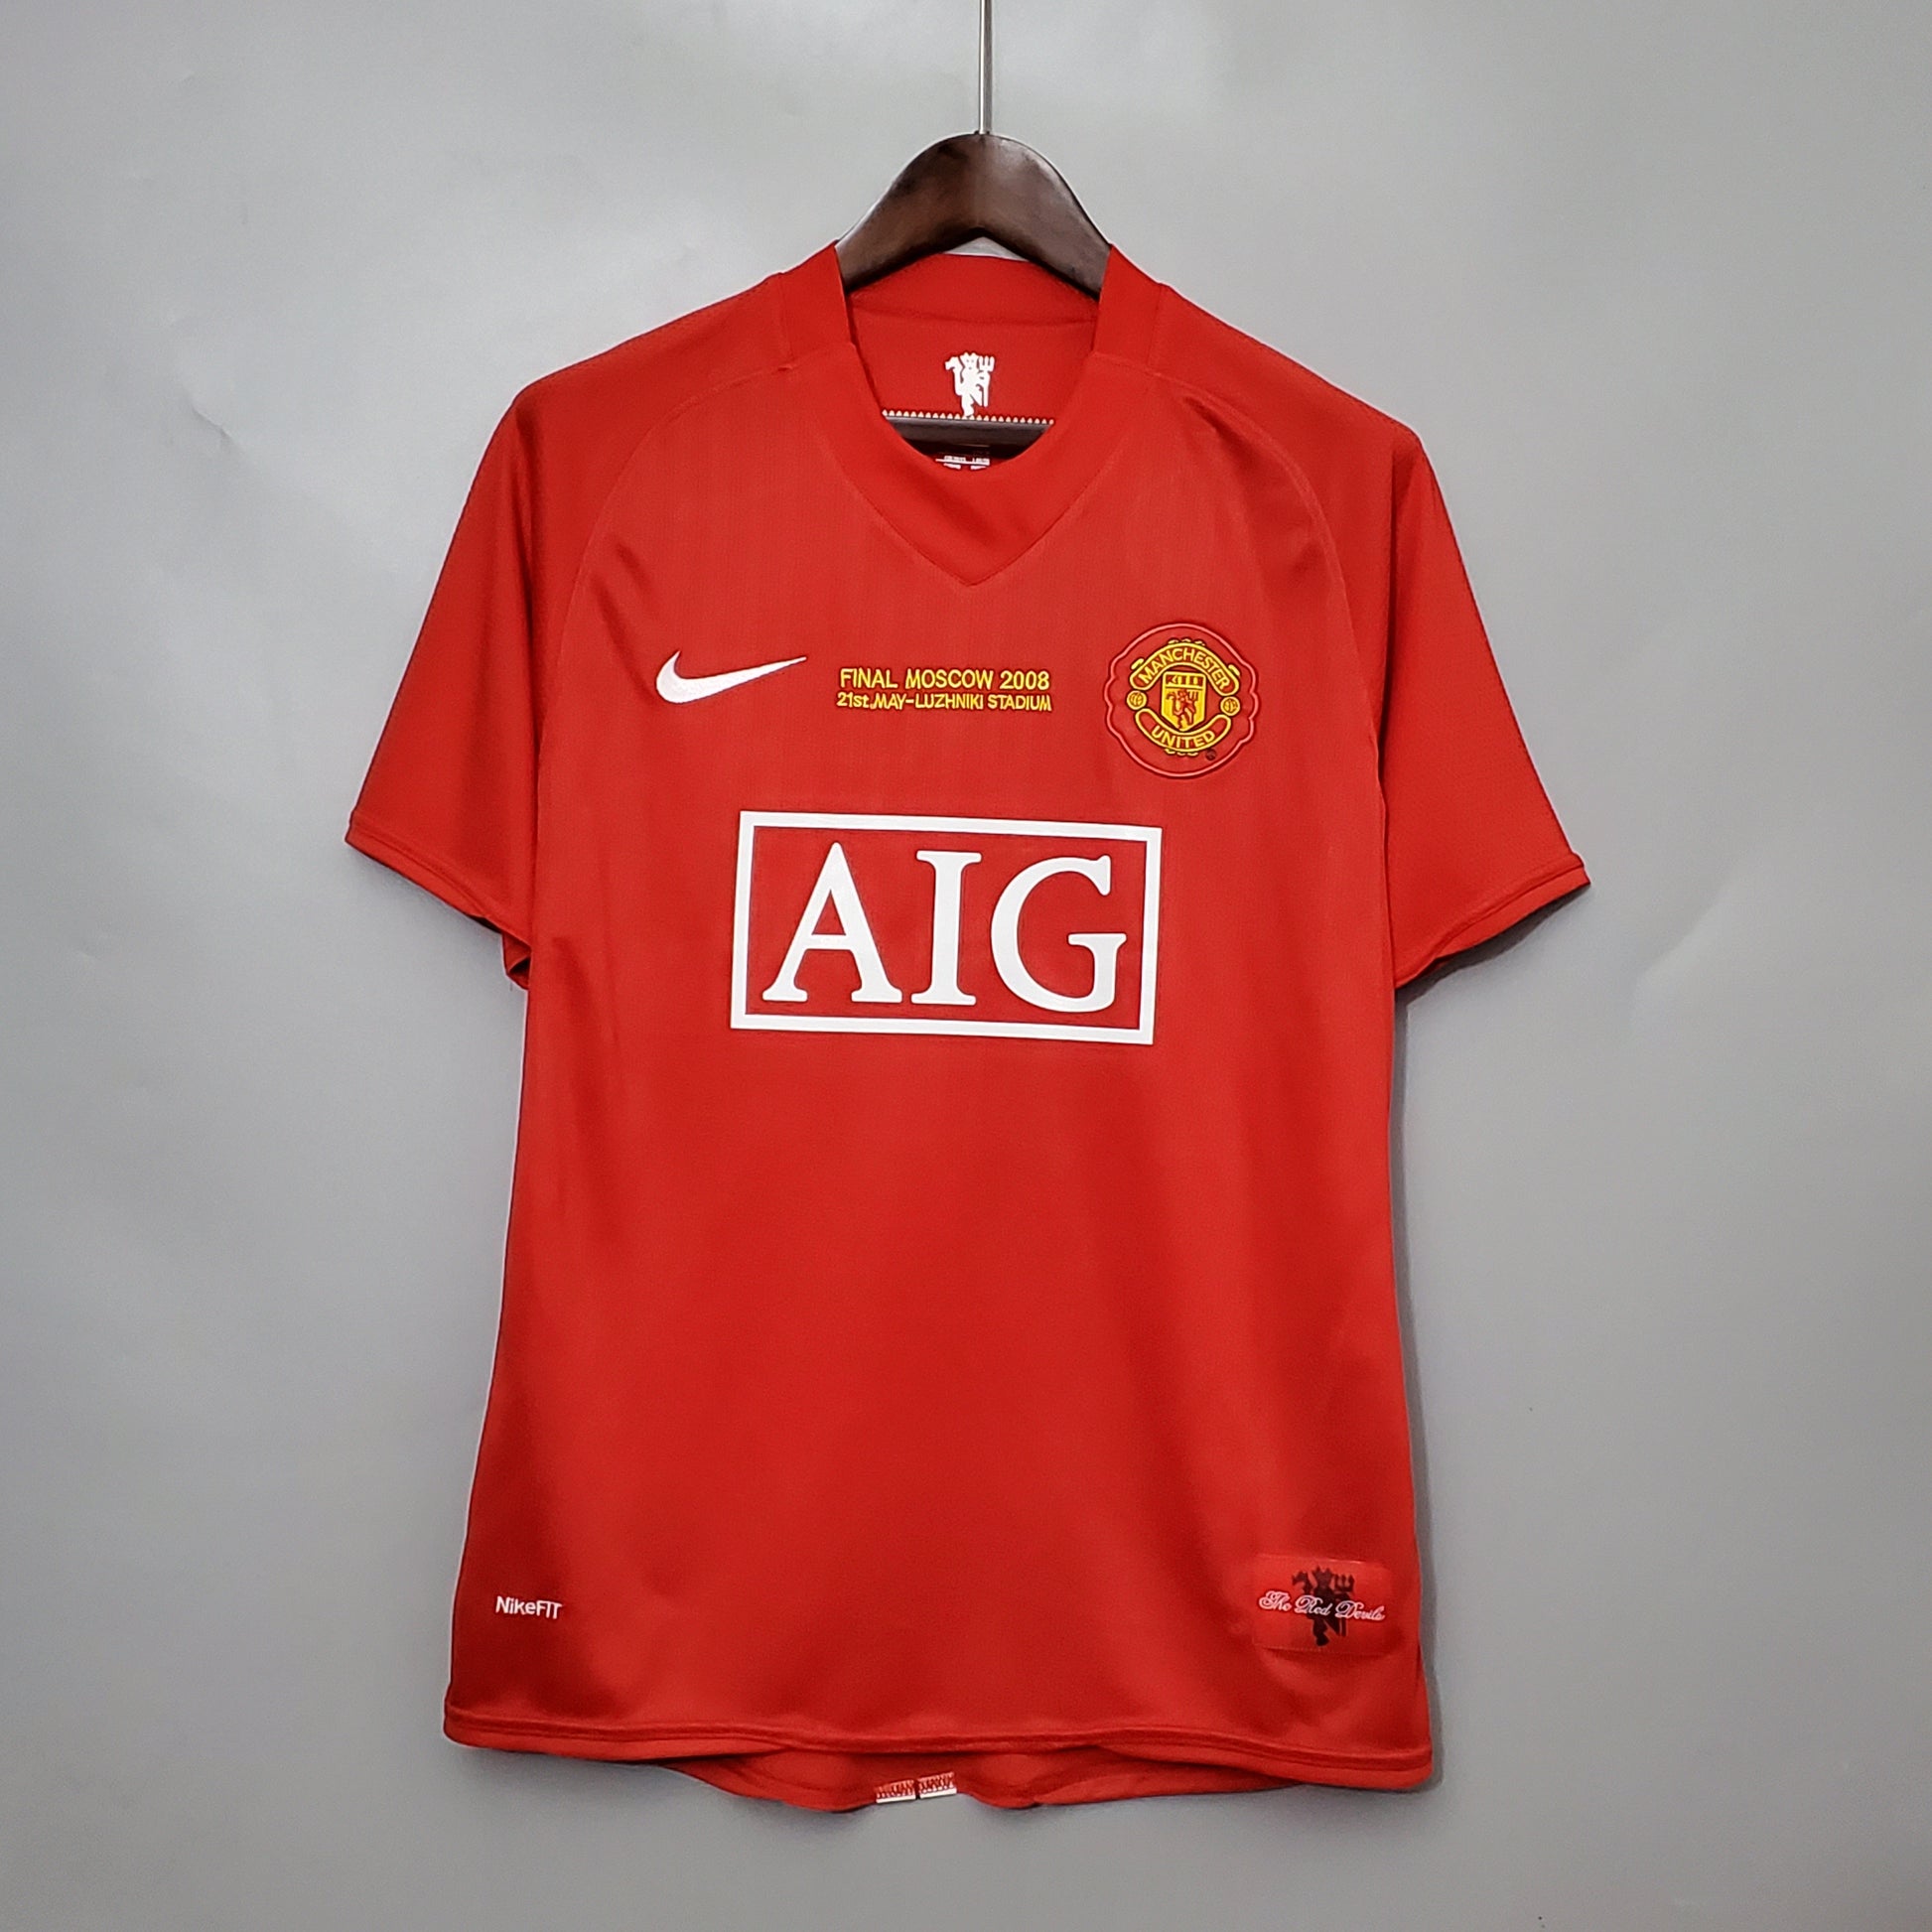 Retro Manchester United Home Jersey 2007/08 By Nike